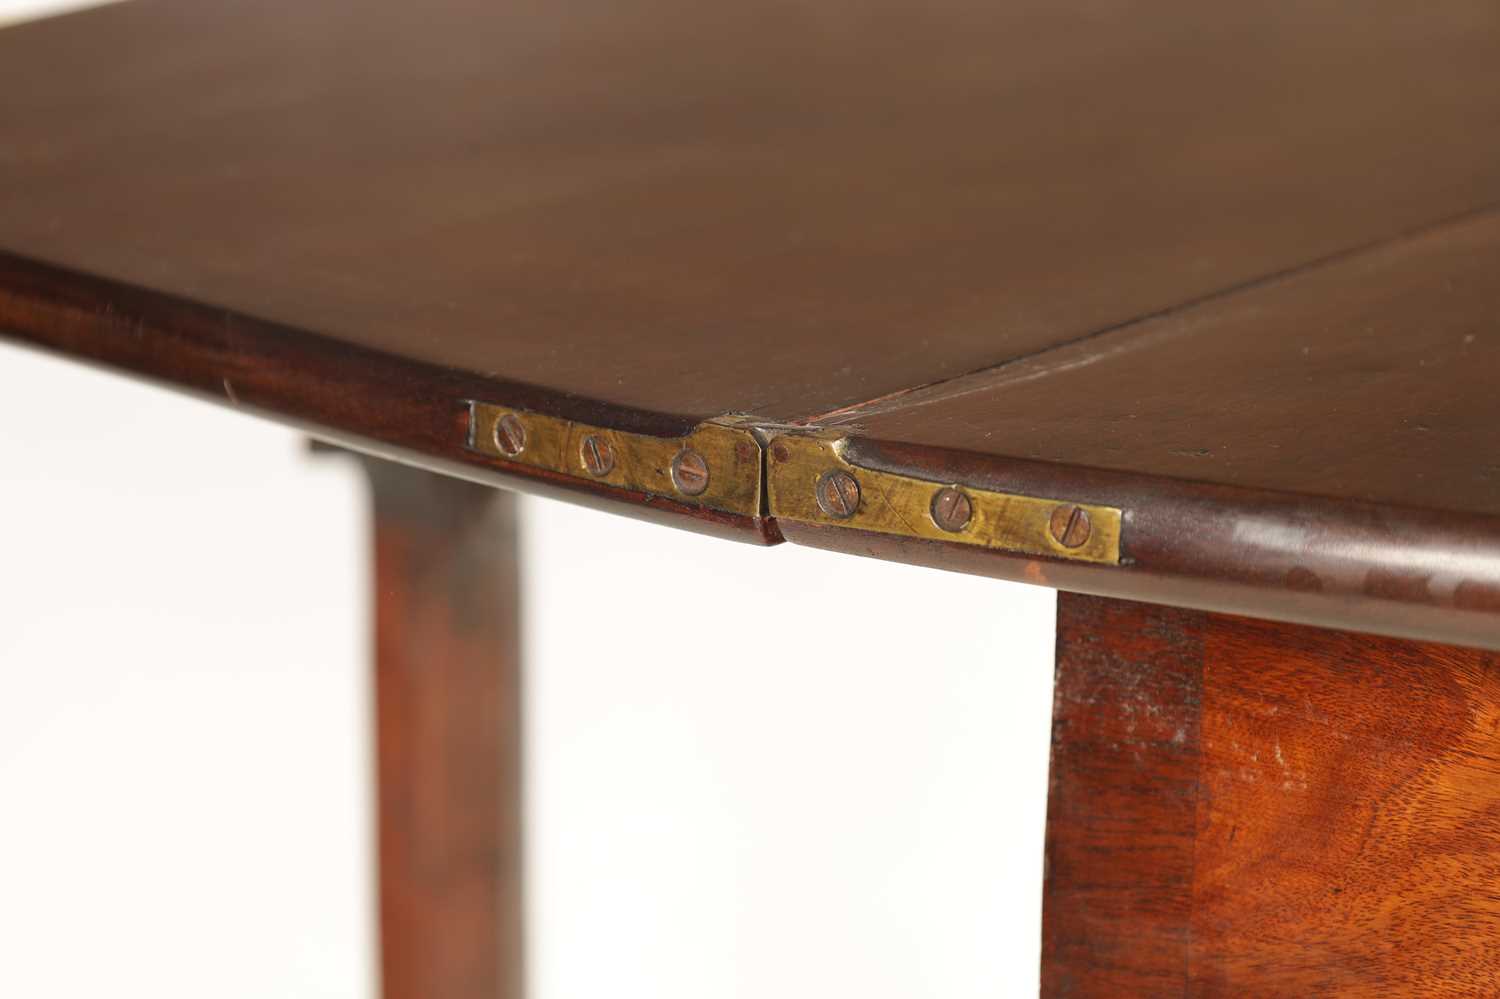 A GEORGE III MAHOGANY CHIPPENDALE STYLE SERPENTINE TEA TABLE - Image 8 of 8